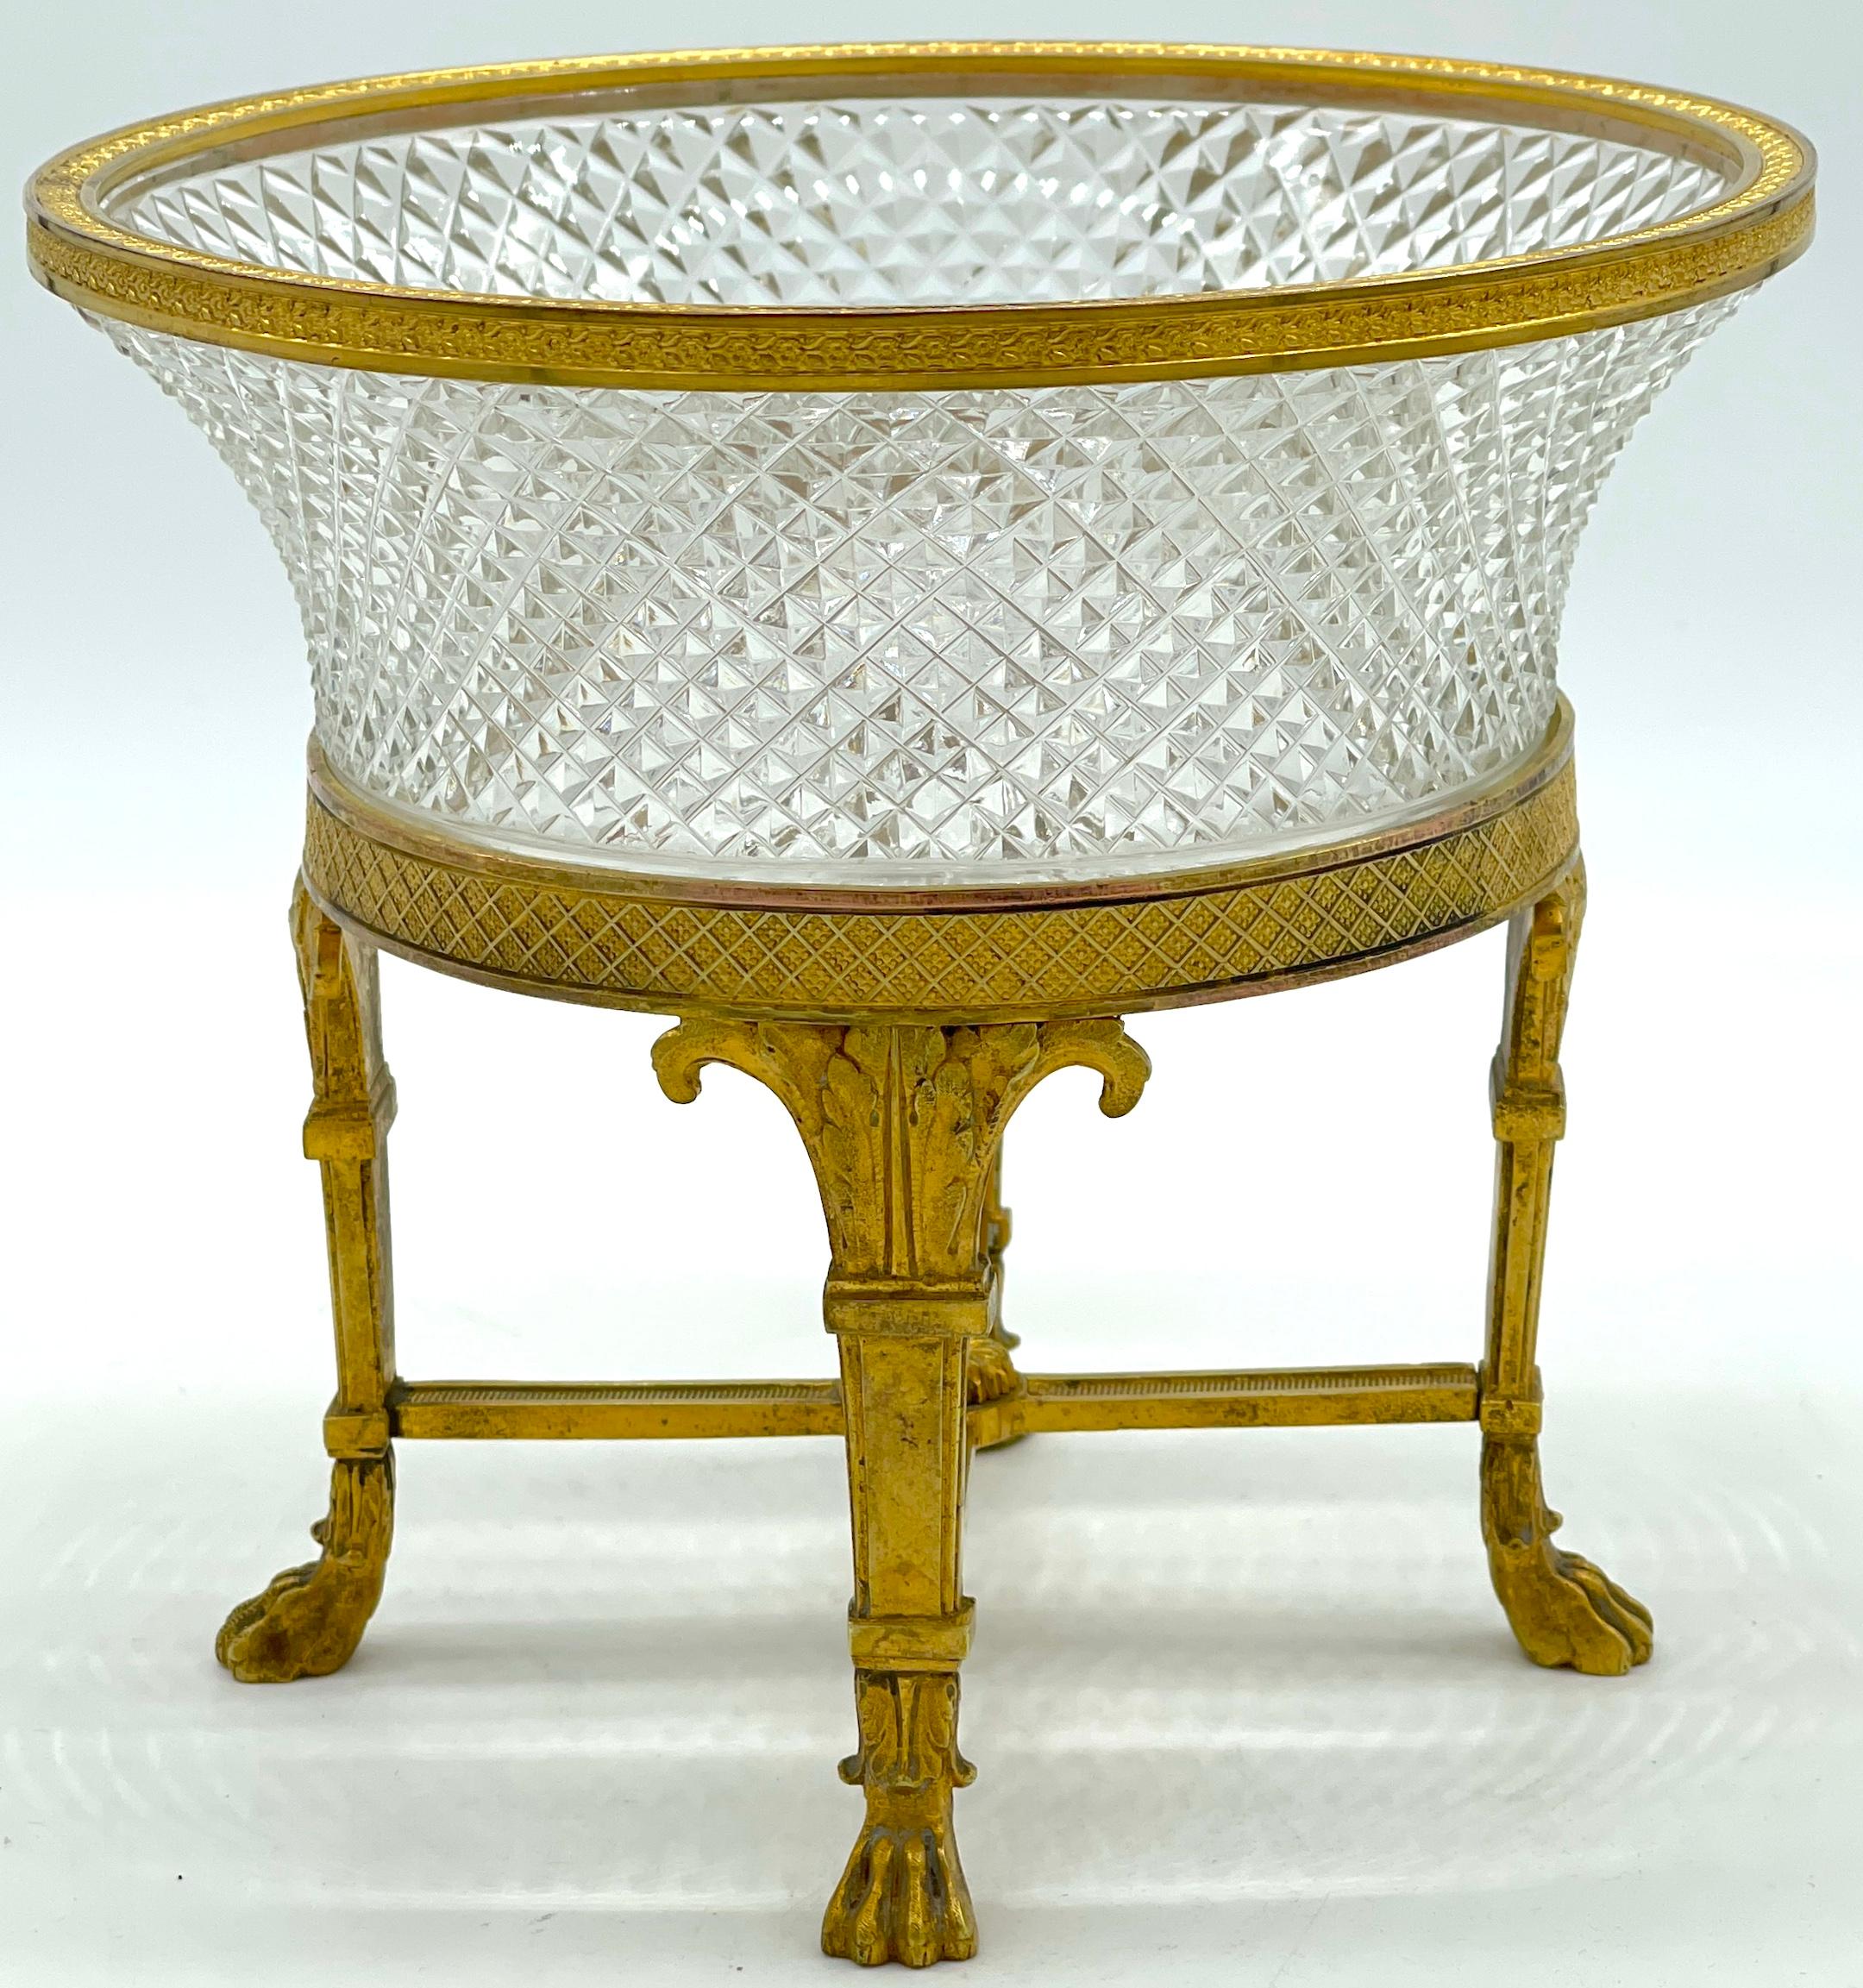 20th Century Empire Style Ormolu & Cut Crystal Compote/ Tazza  For Sale